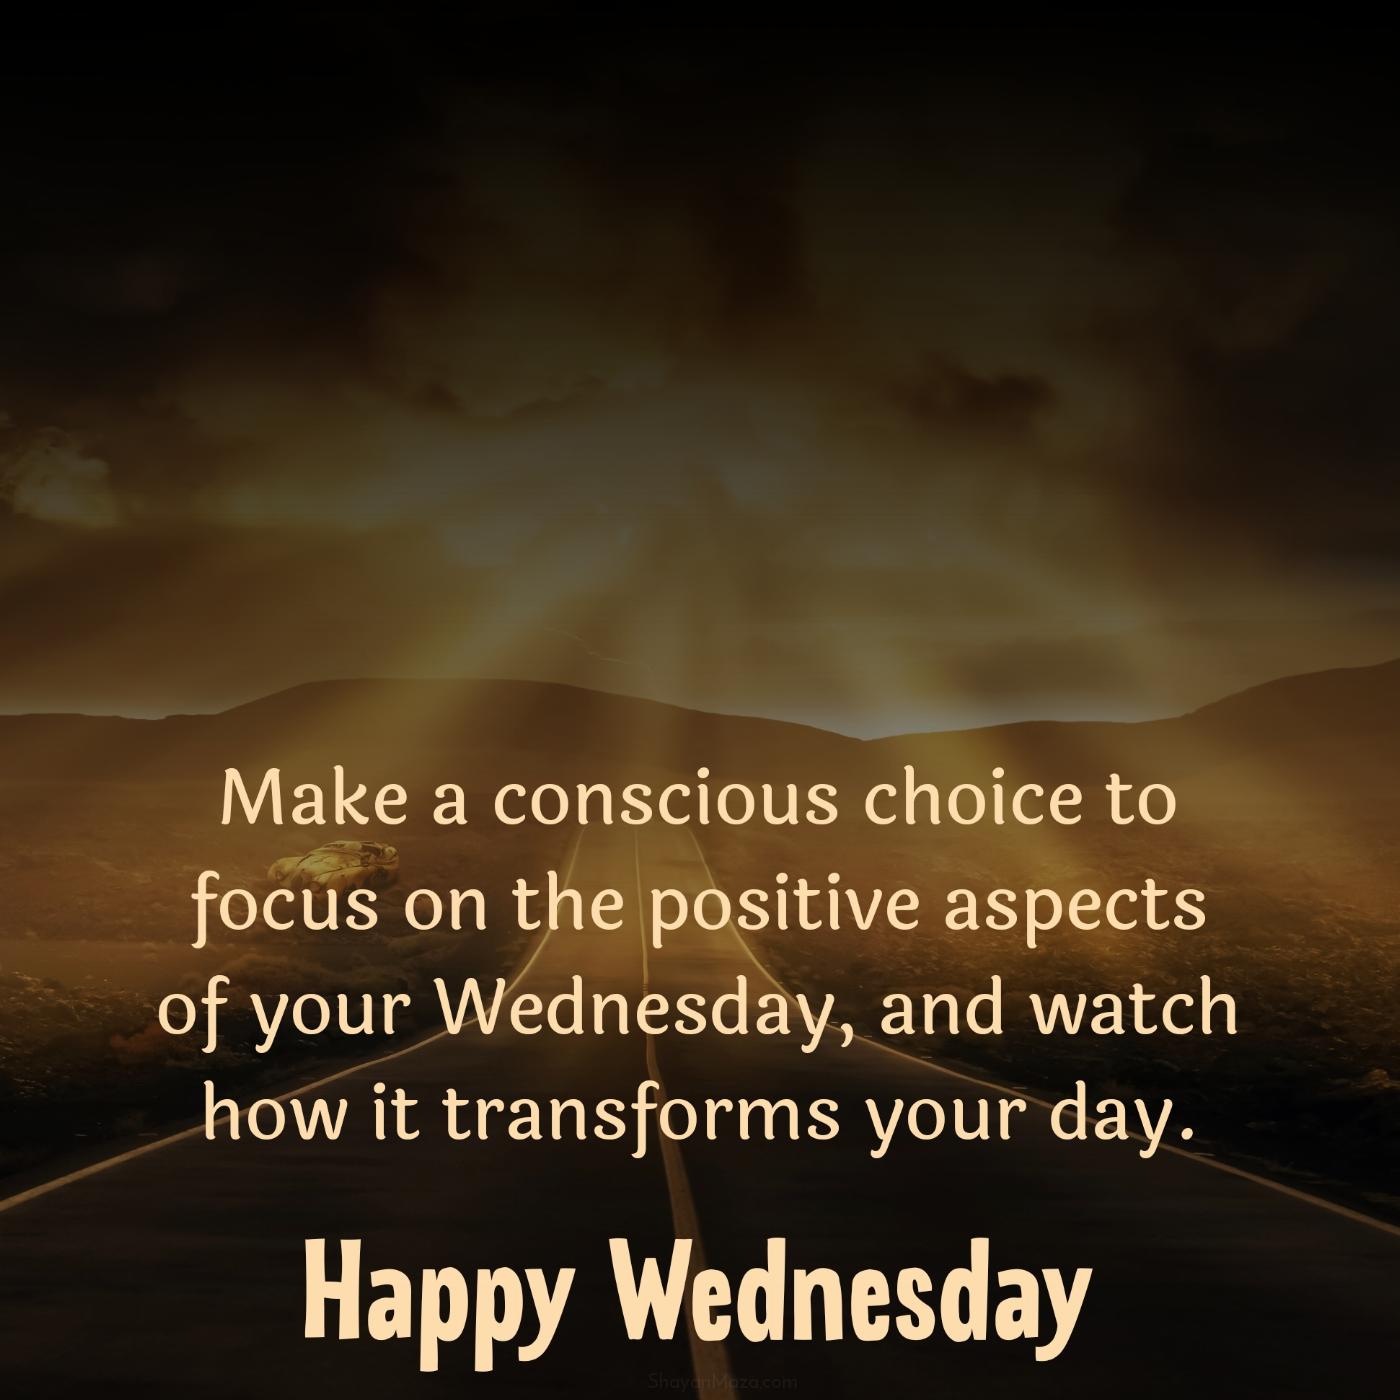 Make a conscious choice to focus on the positive aspects